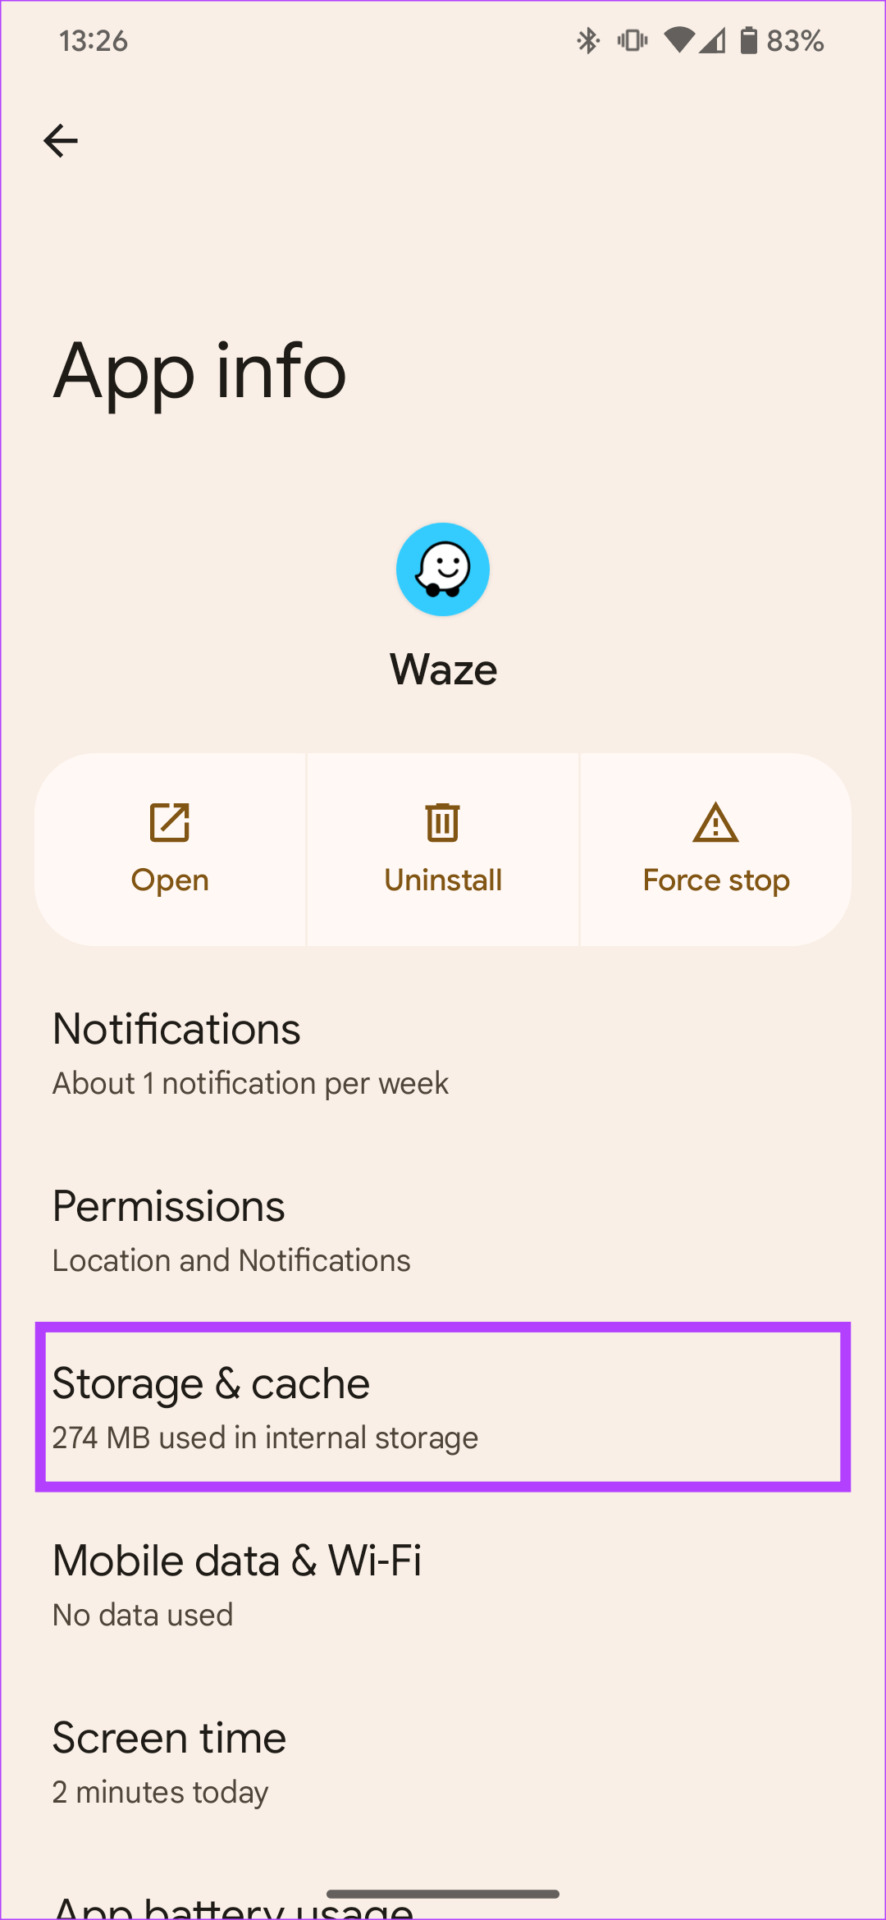 Storage and cache settings